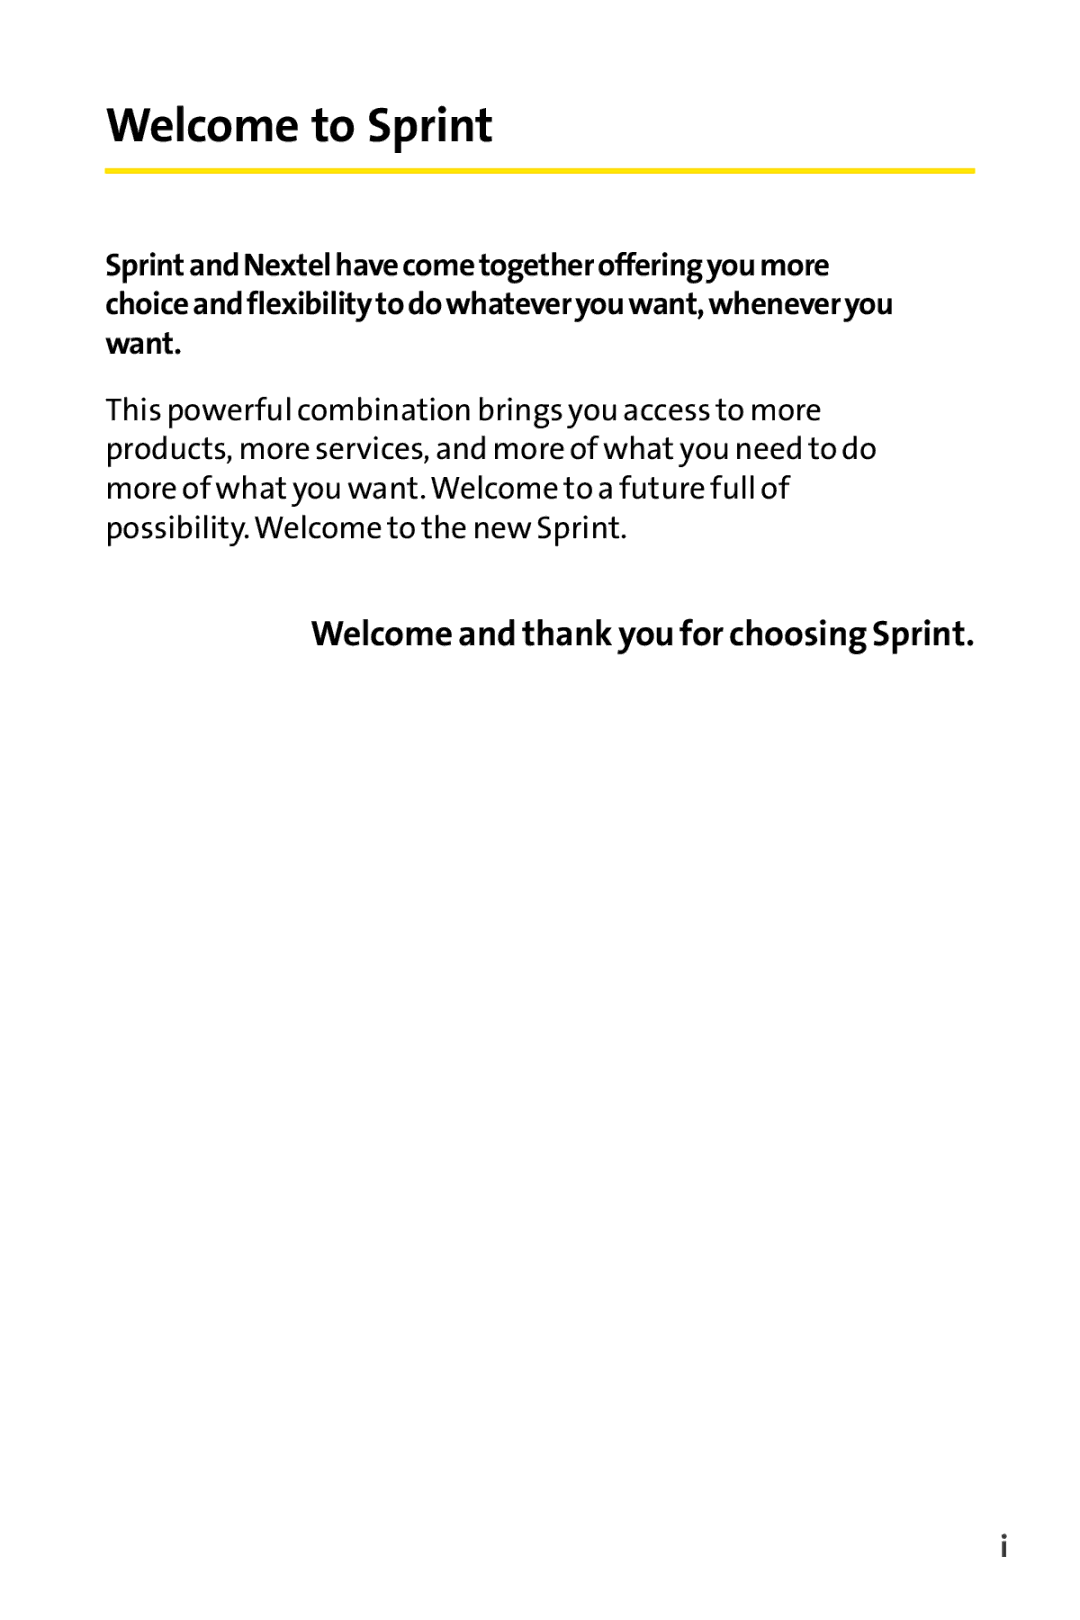 Sprint Nextel SCP-3200 manual Welcome to Sprint, Welcome and thank you for choosing Sprint 